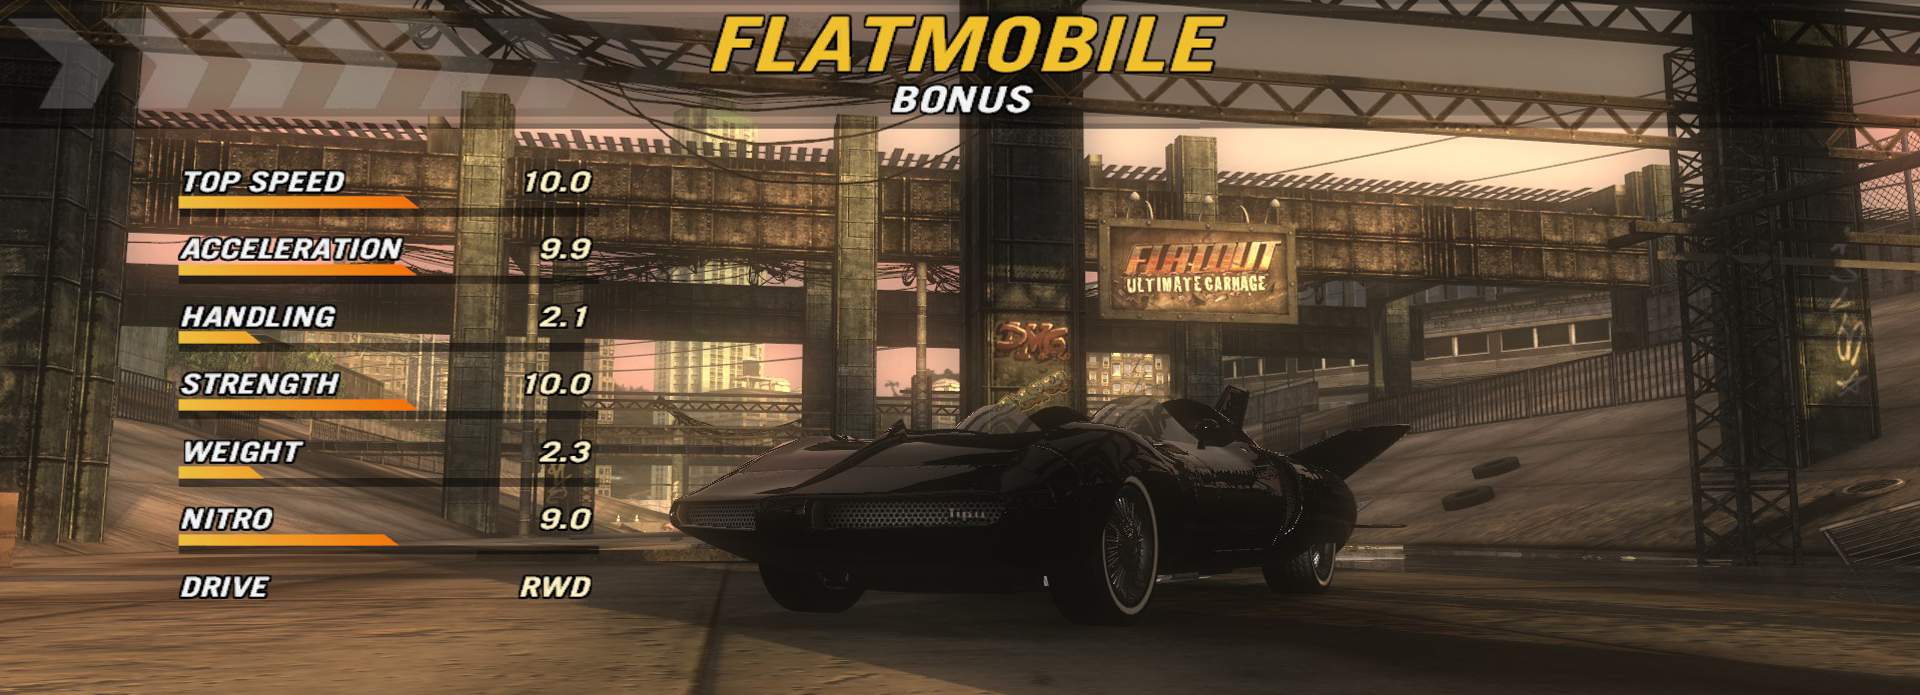 Flatout Ultimate Carnage Extras Codes